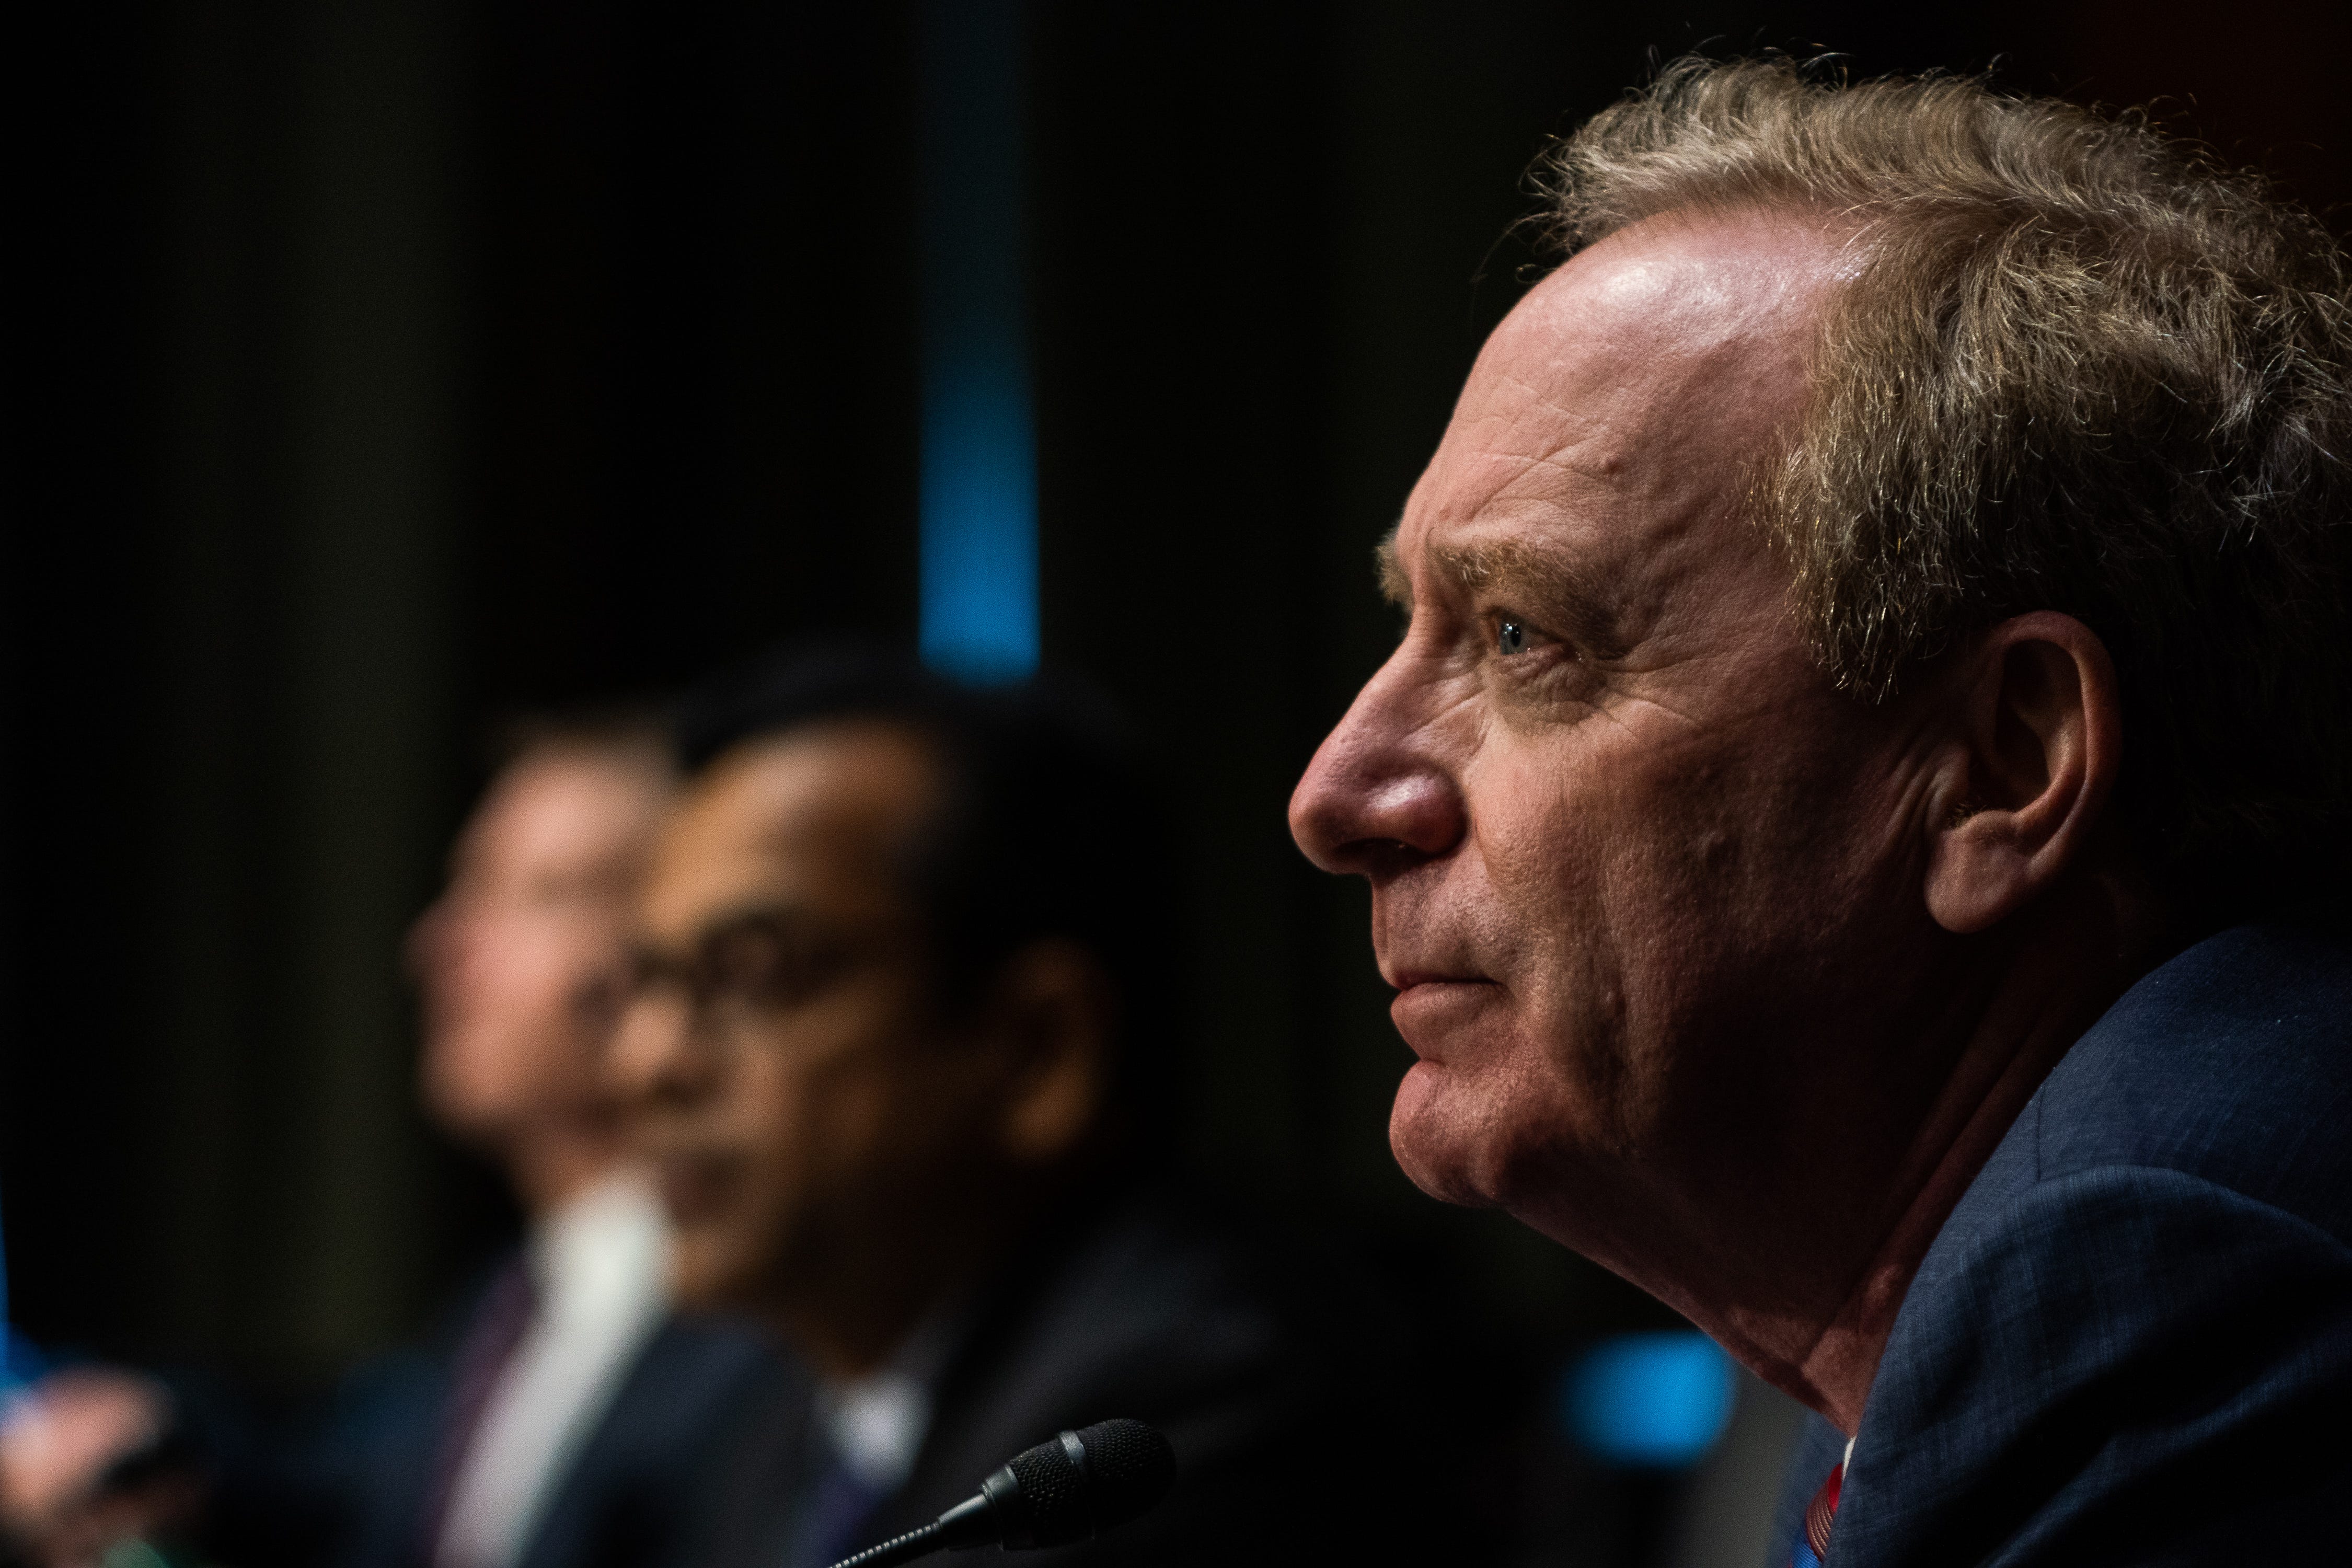 Microsoft Corp. President Brad Smith said broadband networks should be built to meet the nation's needs for many years to come.